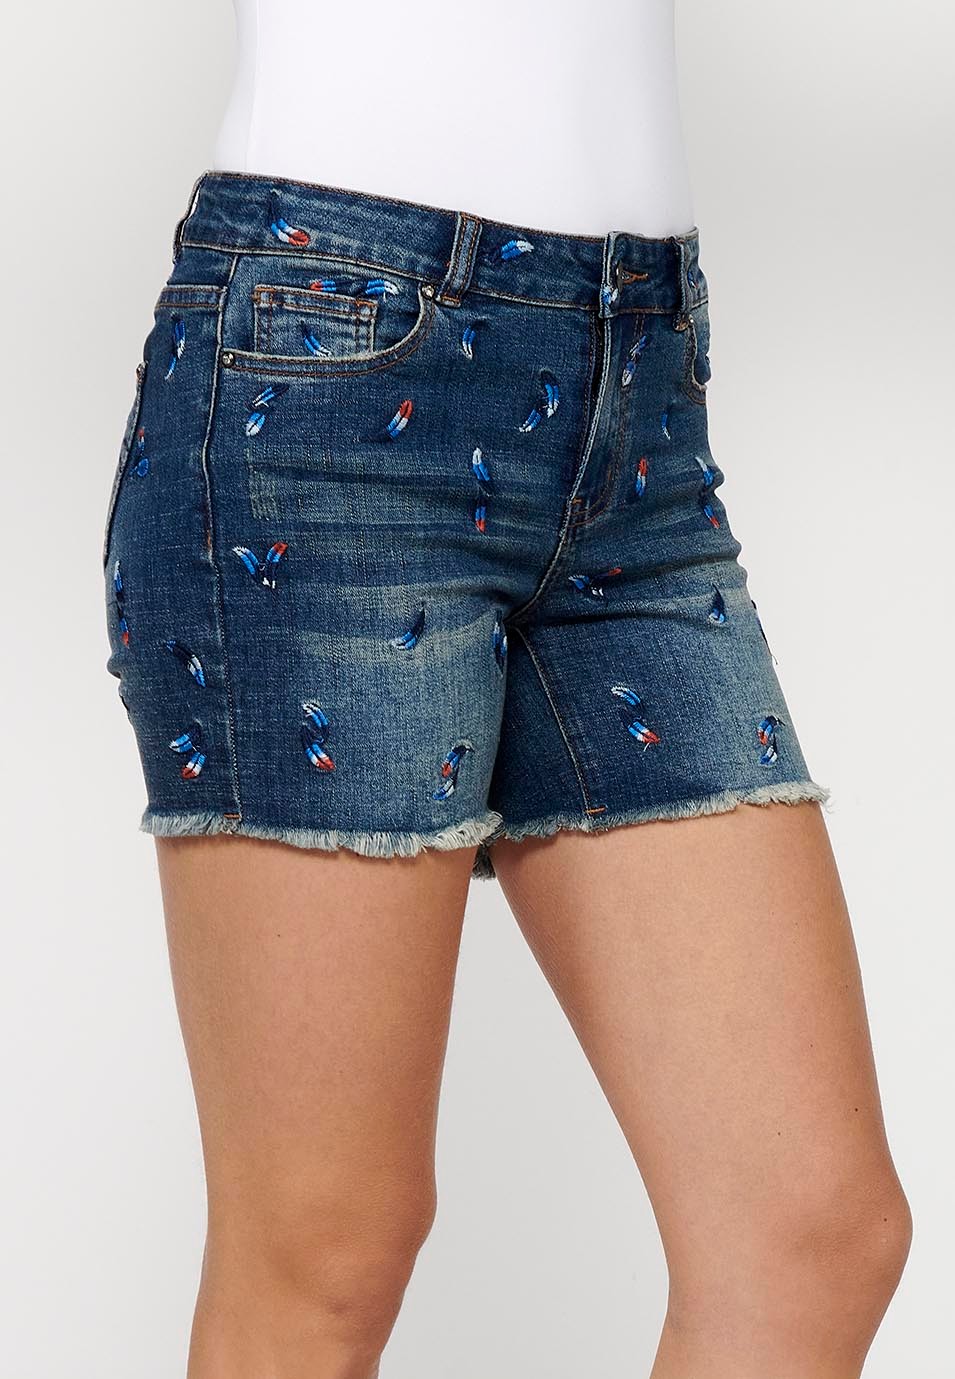 Denim shorts with front zipper and button closure and embroidered fabric with five pockets, one blue pocket pocket for women 4